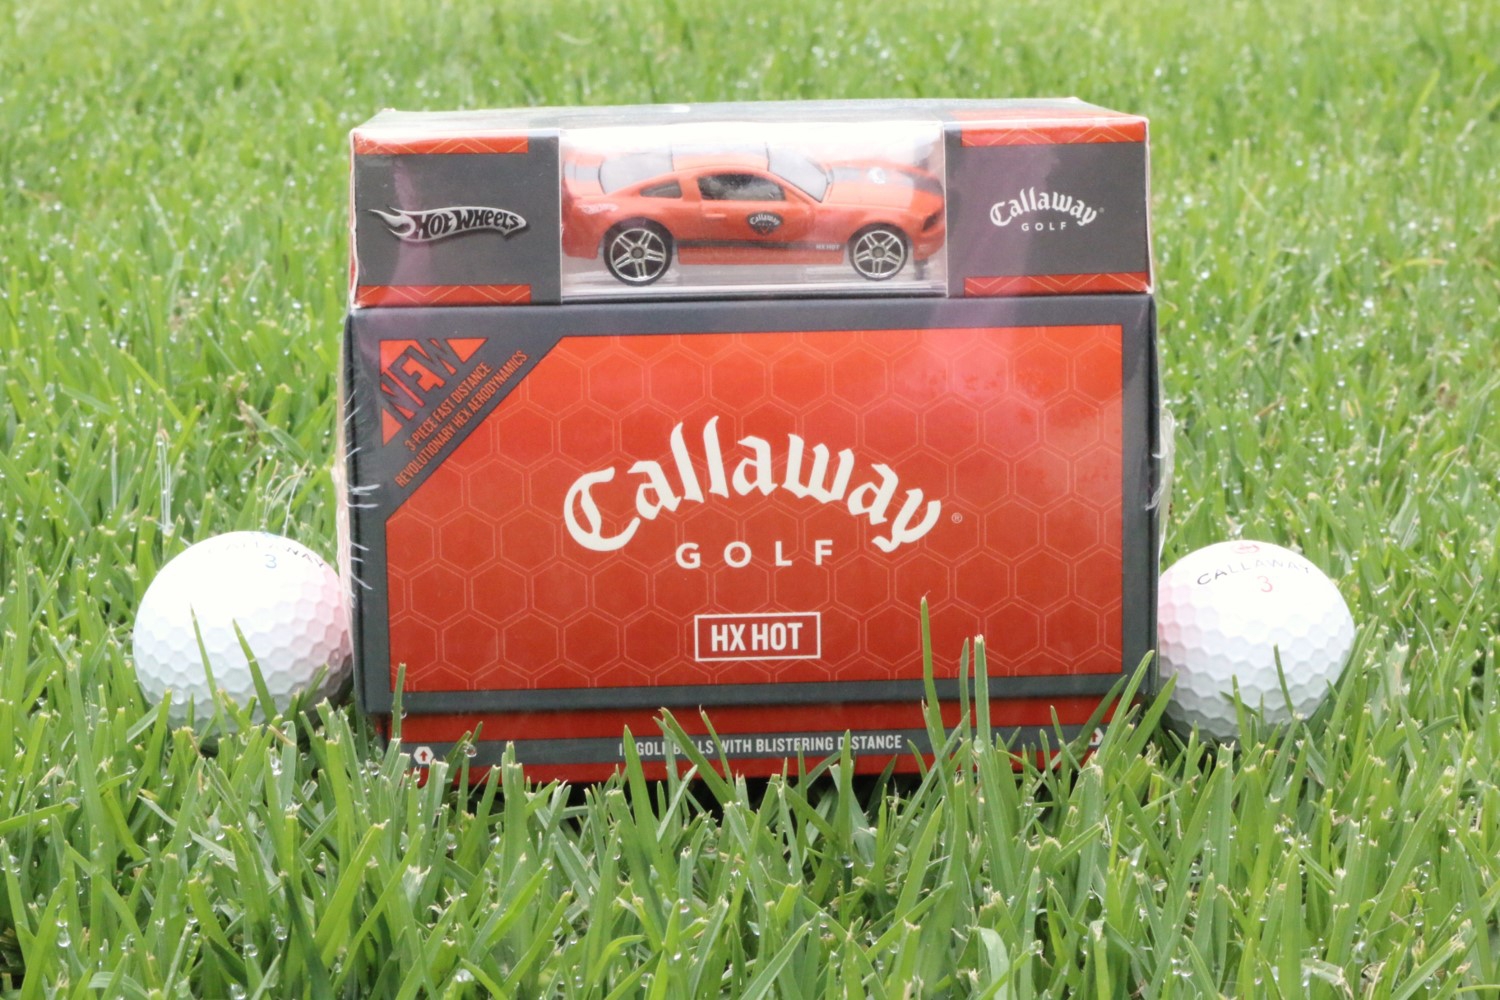 A red car is in the grass with golf balls.